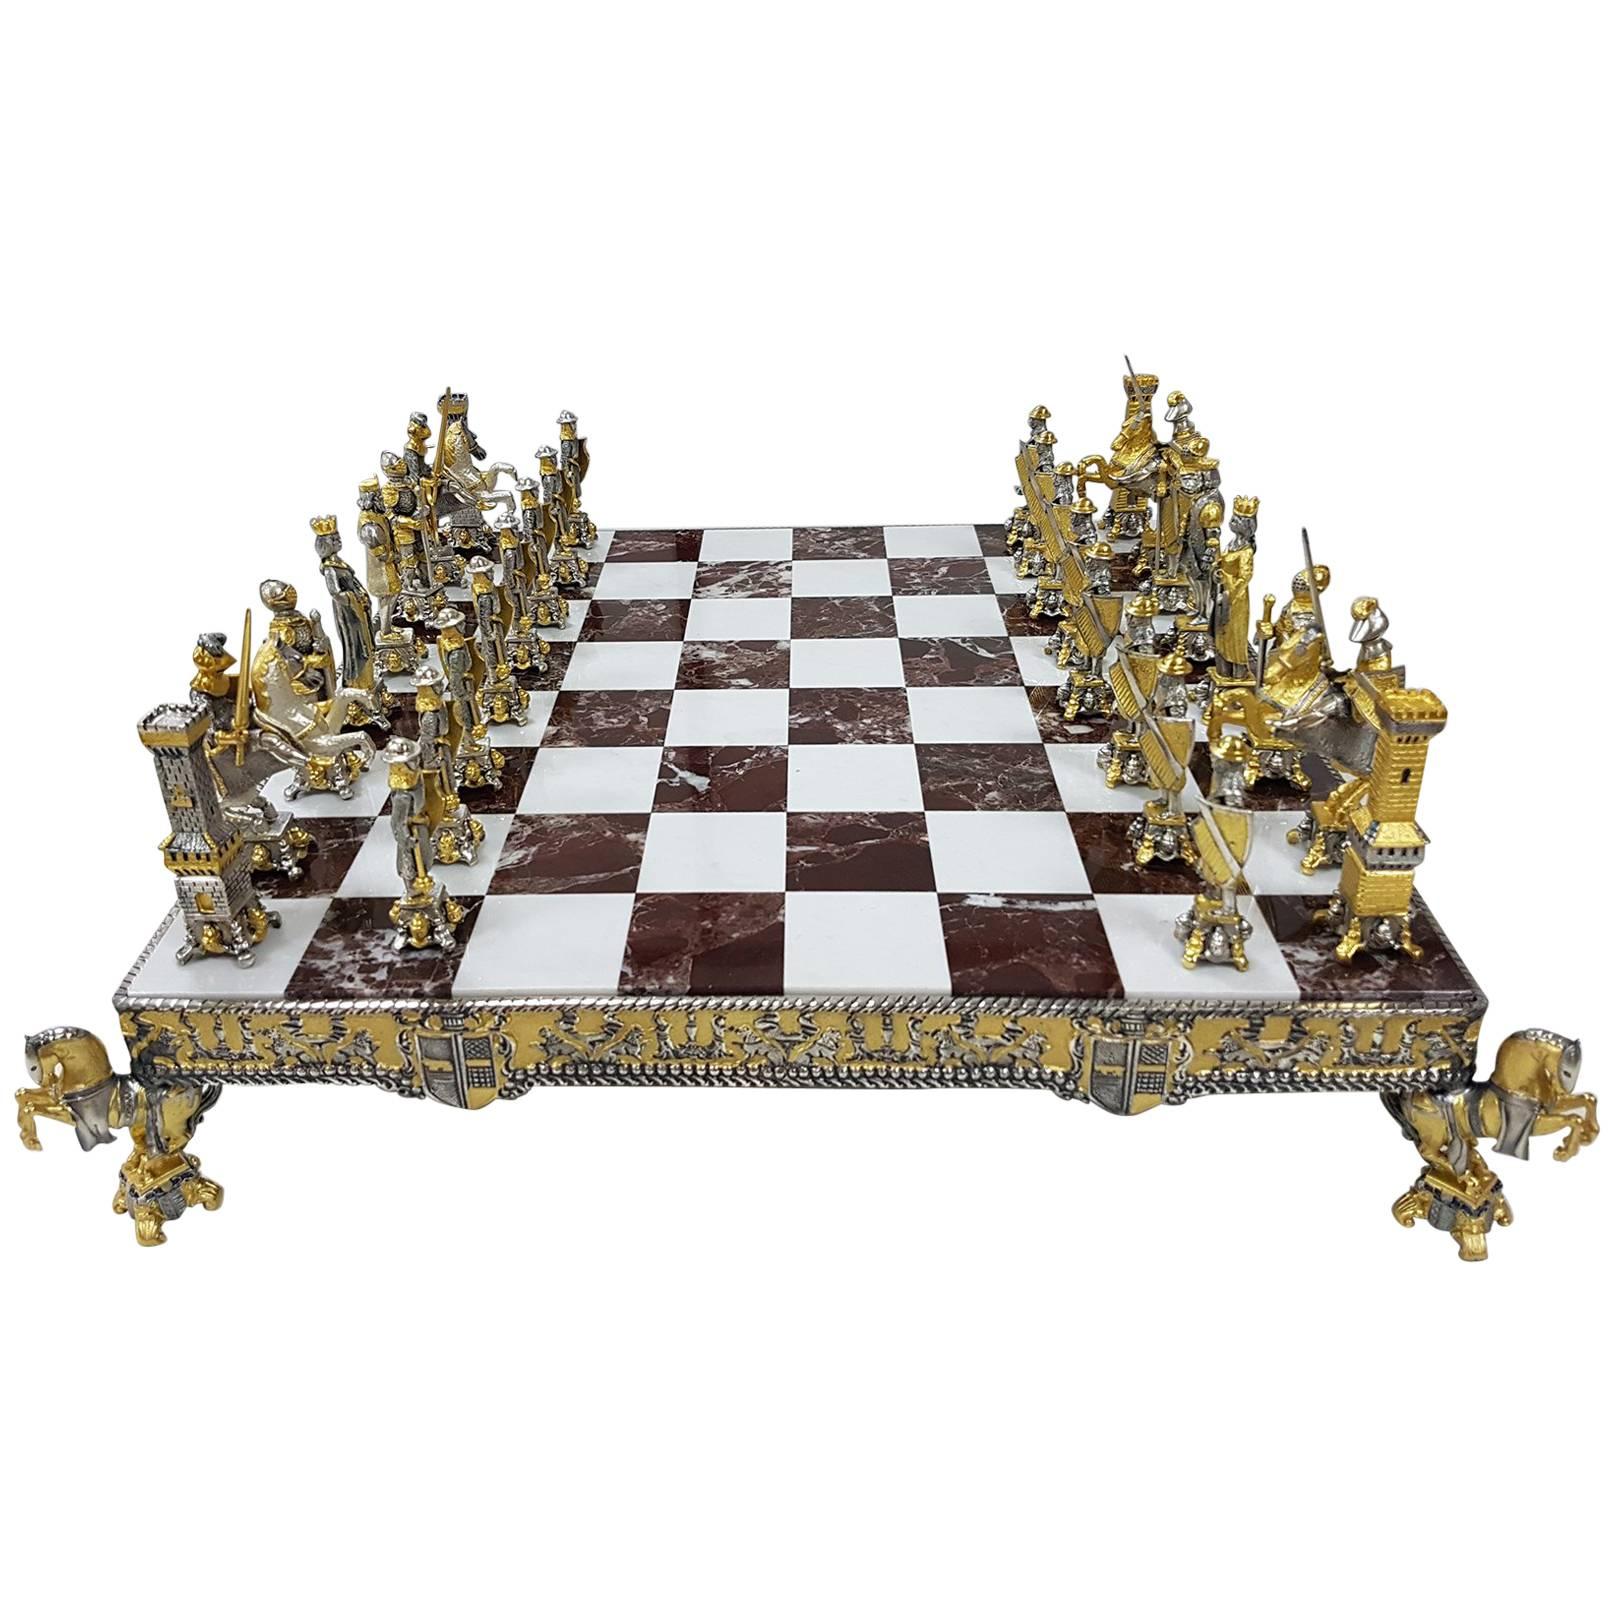 20th Century Italian Sterling Silver Chess Board and Chess Game. Made in Italy